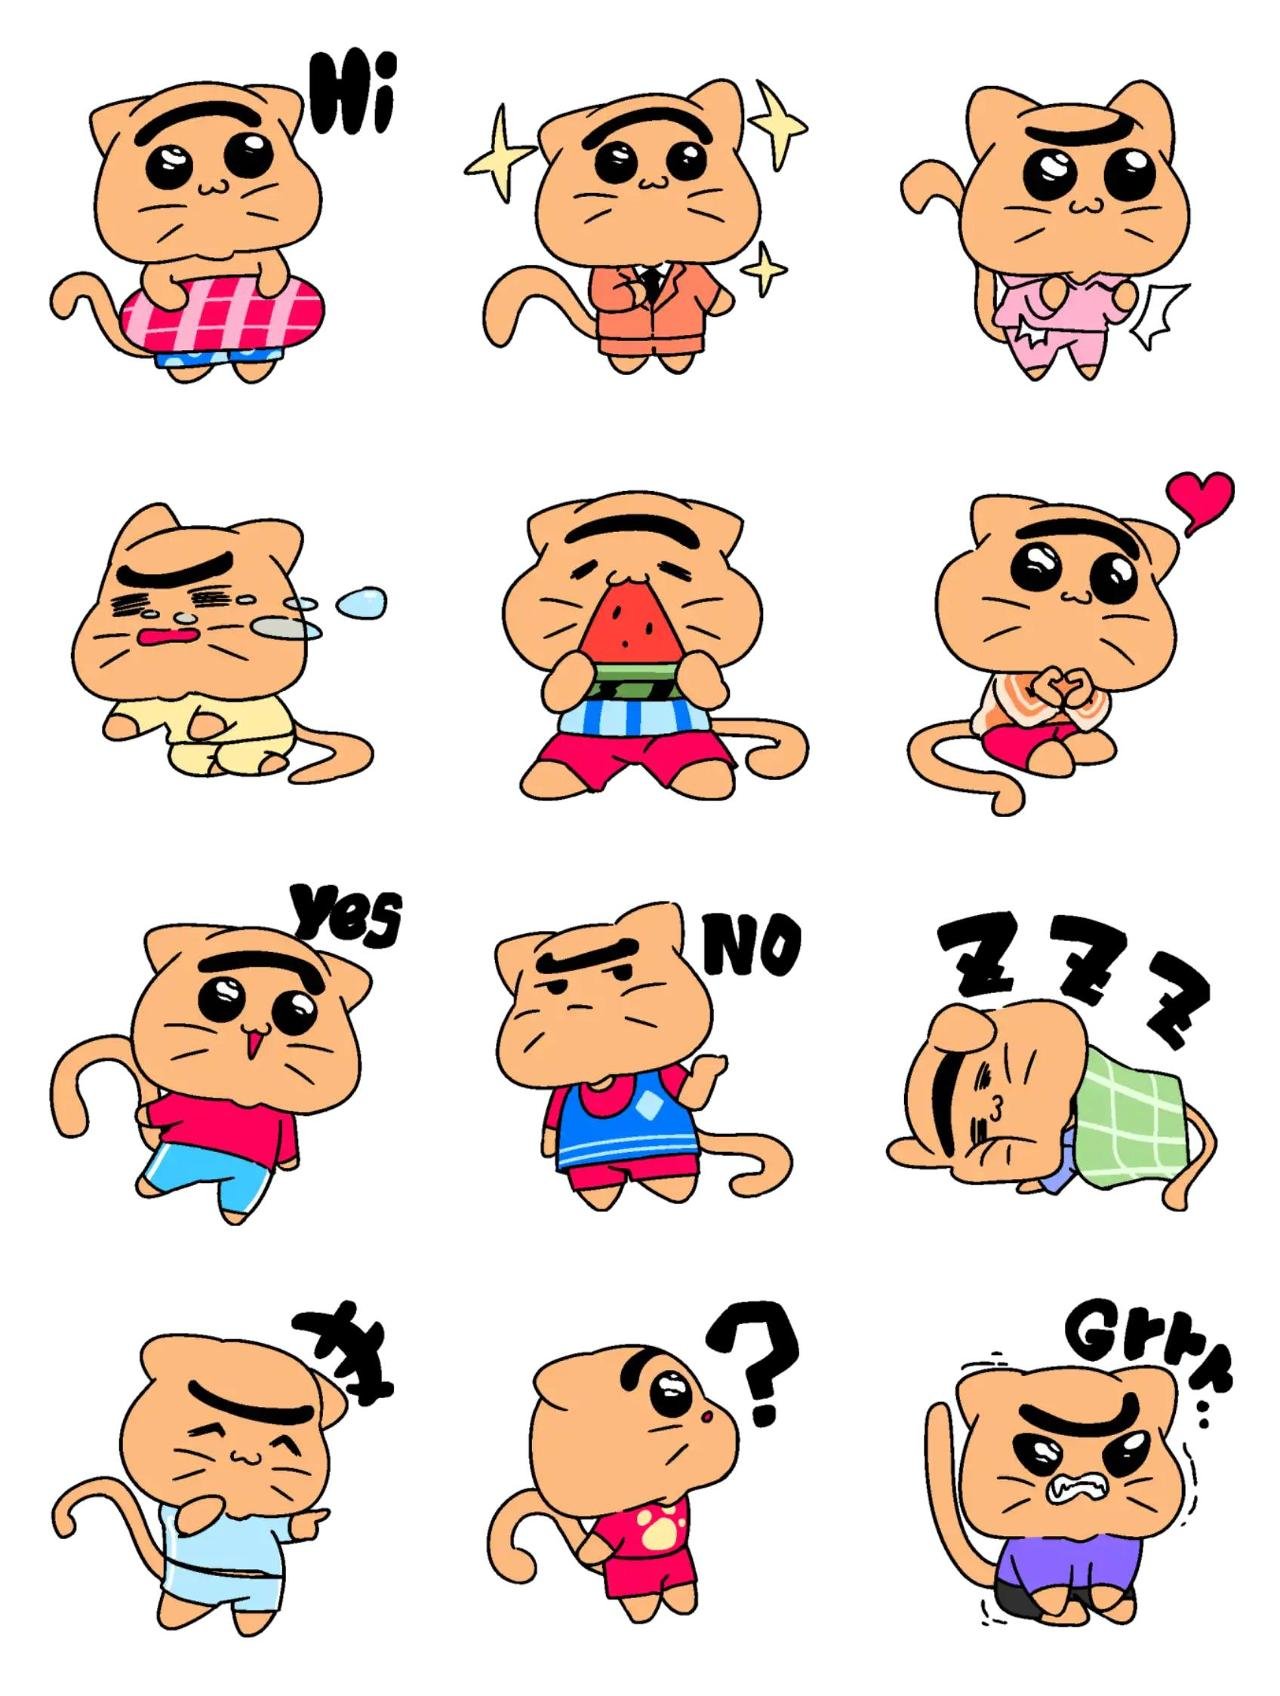 Everything is a cute cat! [2] Animation/Cartoon,Animals sticker pack for Whatsapp, Telegram, Signal, and others chatting and message apps